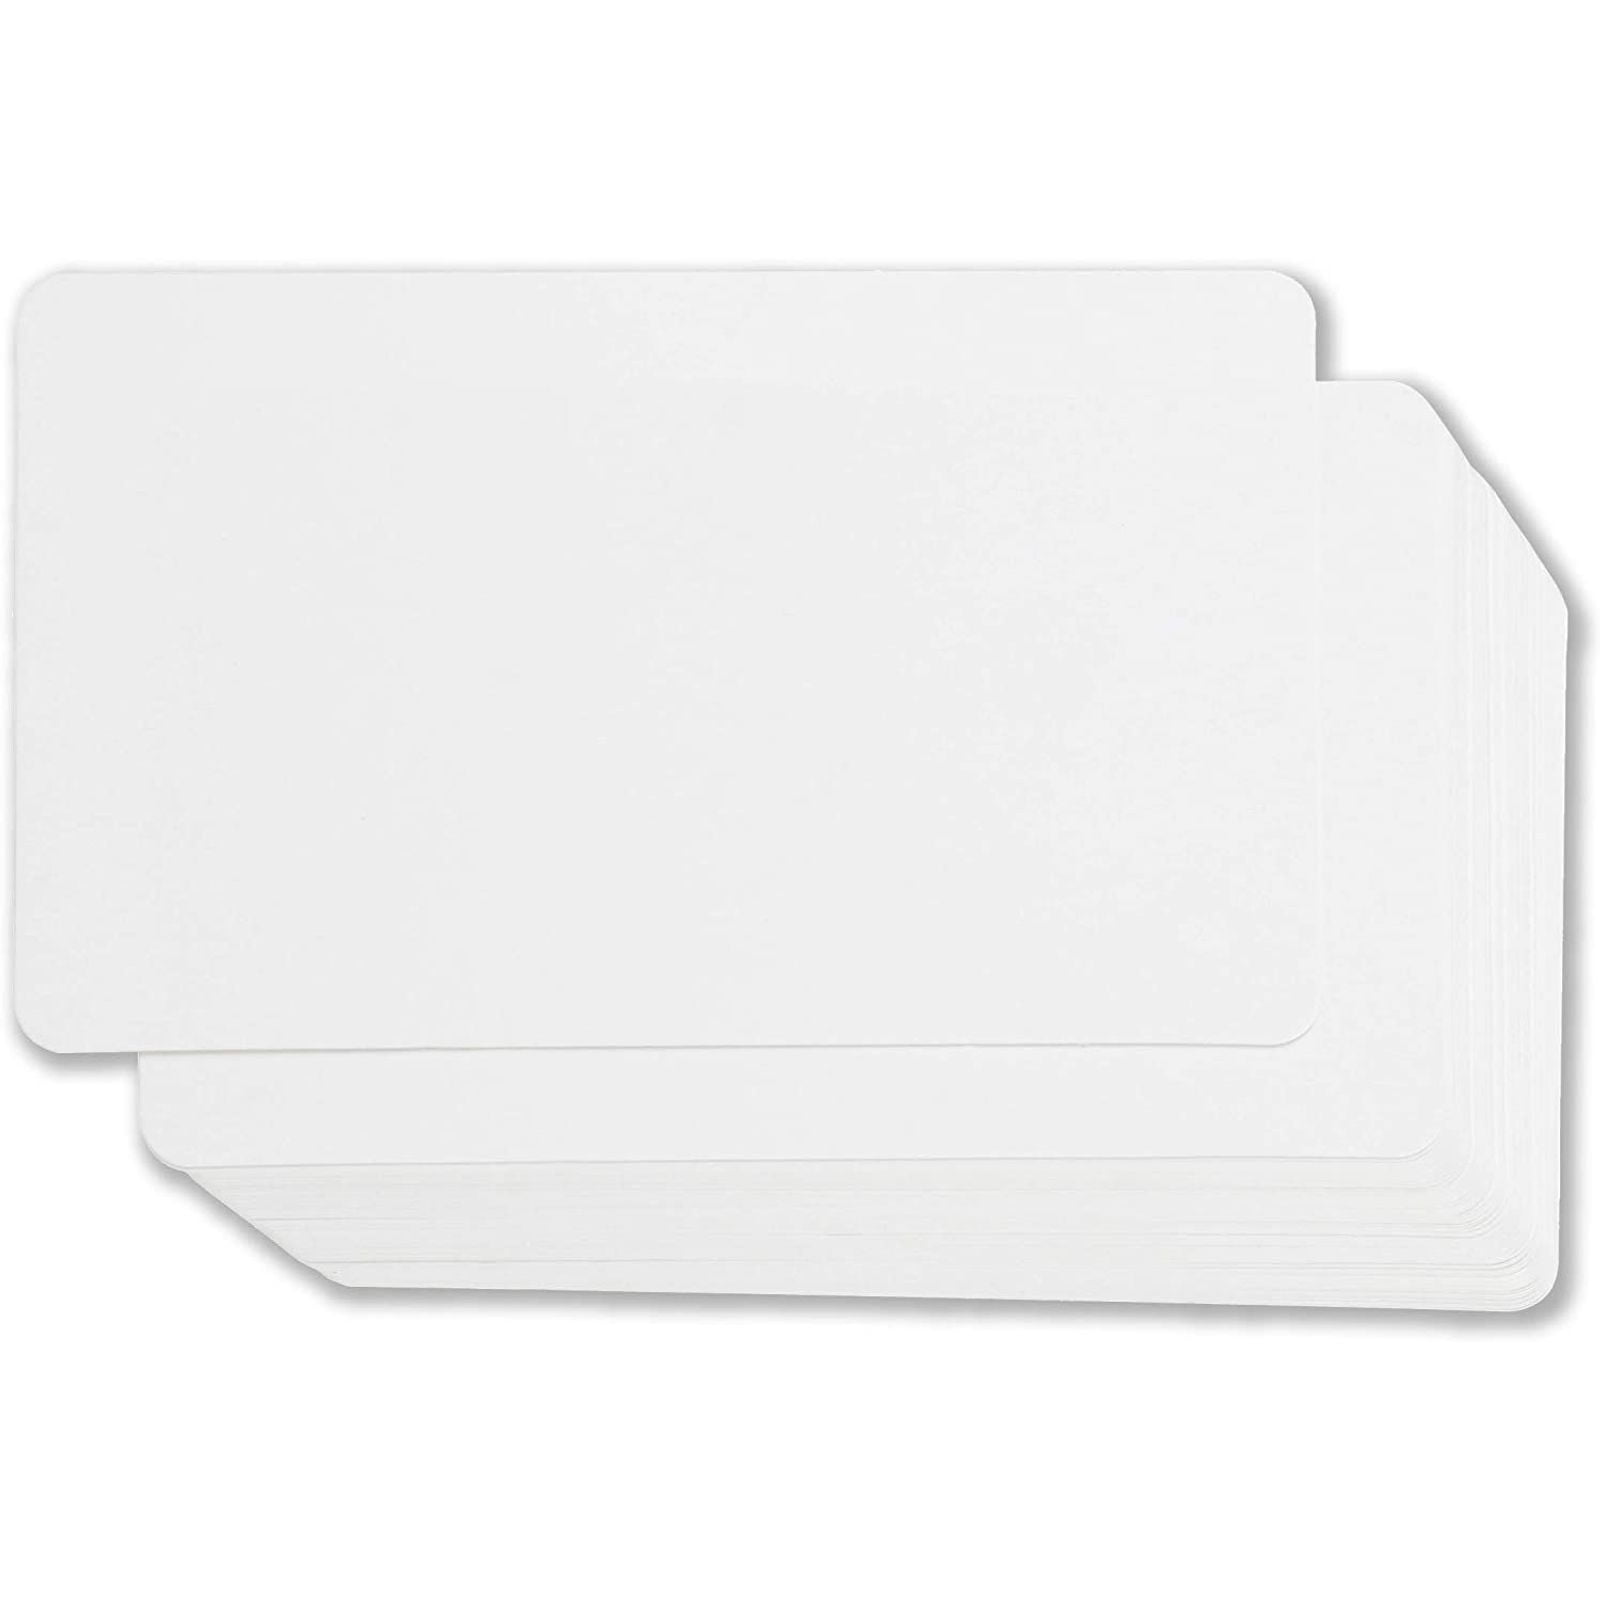 Thick Blank Index Cards – Perfect for Taking Notes, Flash and Business Cards, Shopping Lists and Recipe Cards, Contact Information | White 100lb